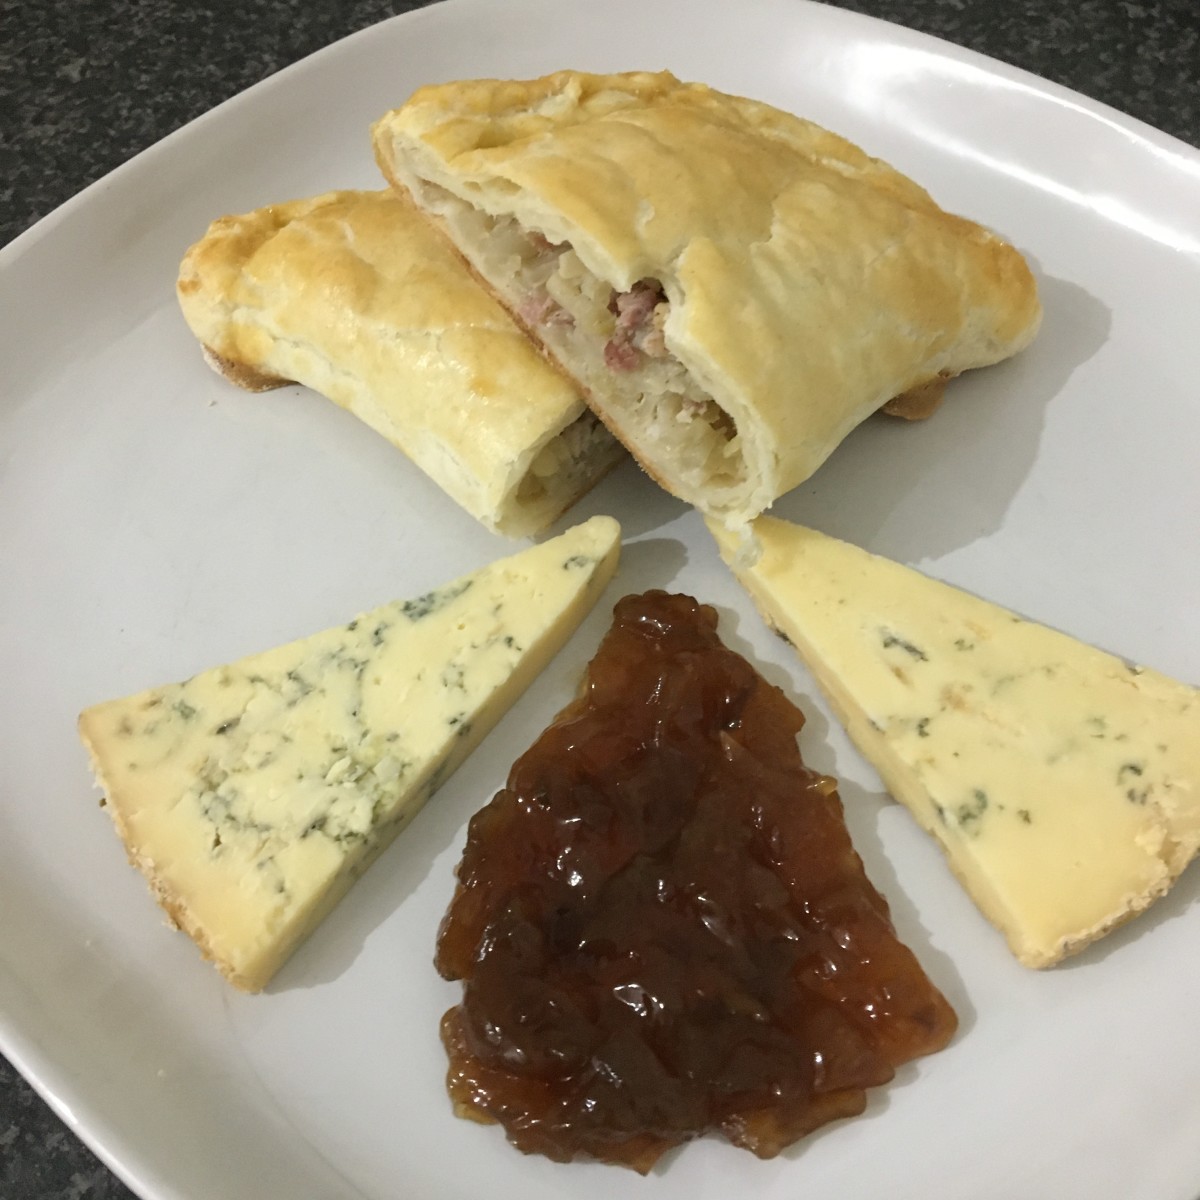 Cabbage and bacon pasty is served with cheese and chutney